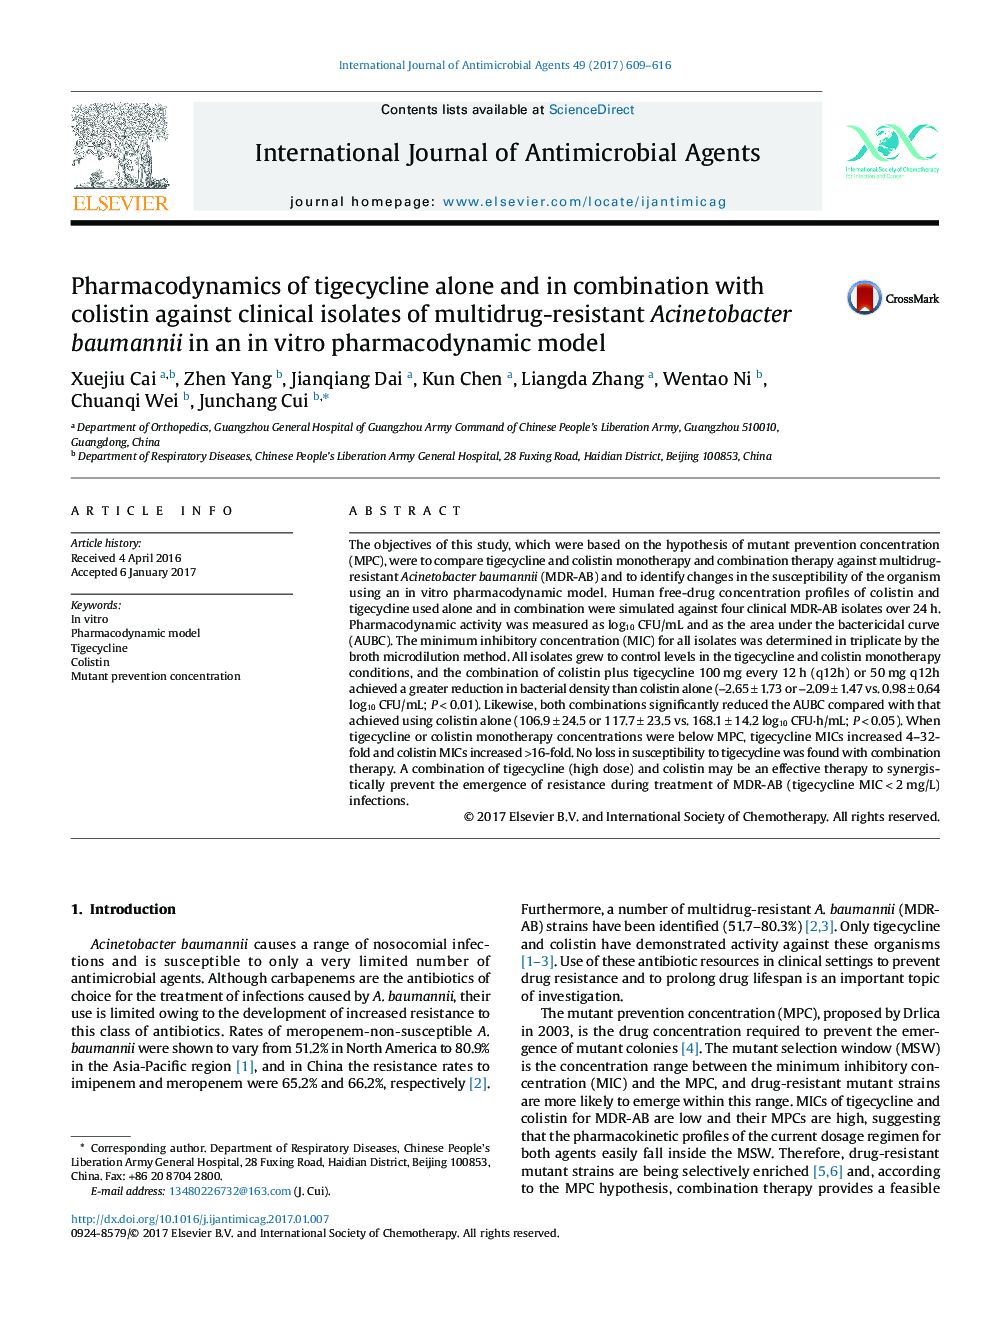 Pharmacodynamics of tigecycline alone and in combination with colistin against clinical isolates of multidrug-resistant Acinetobacter baumannii in an in vitro pharmacodynamic model